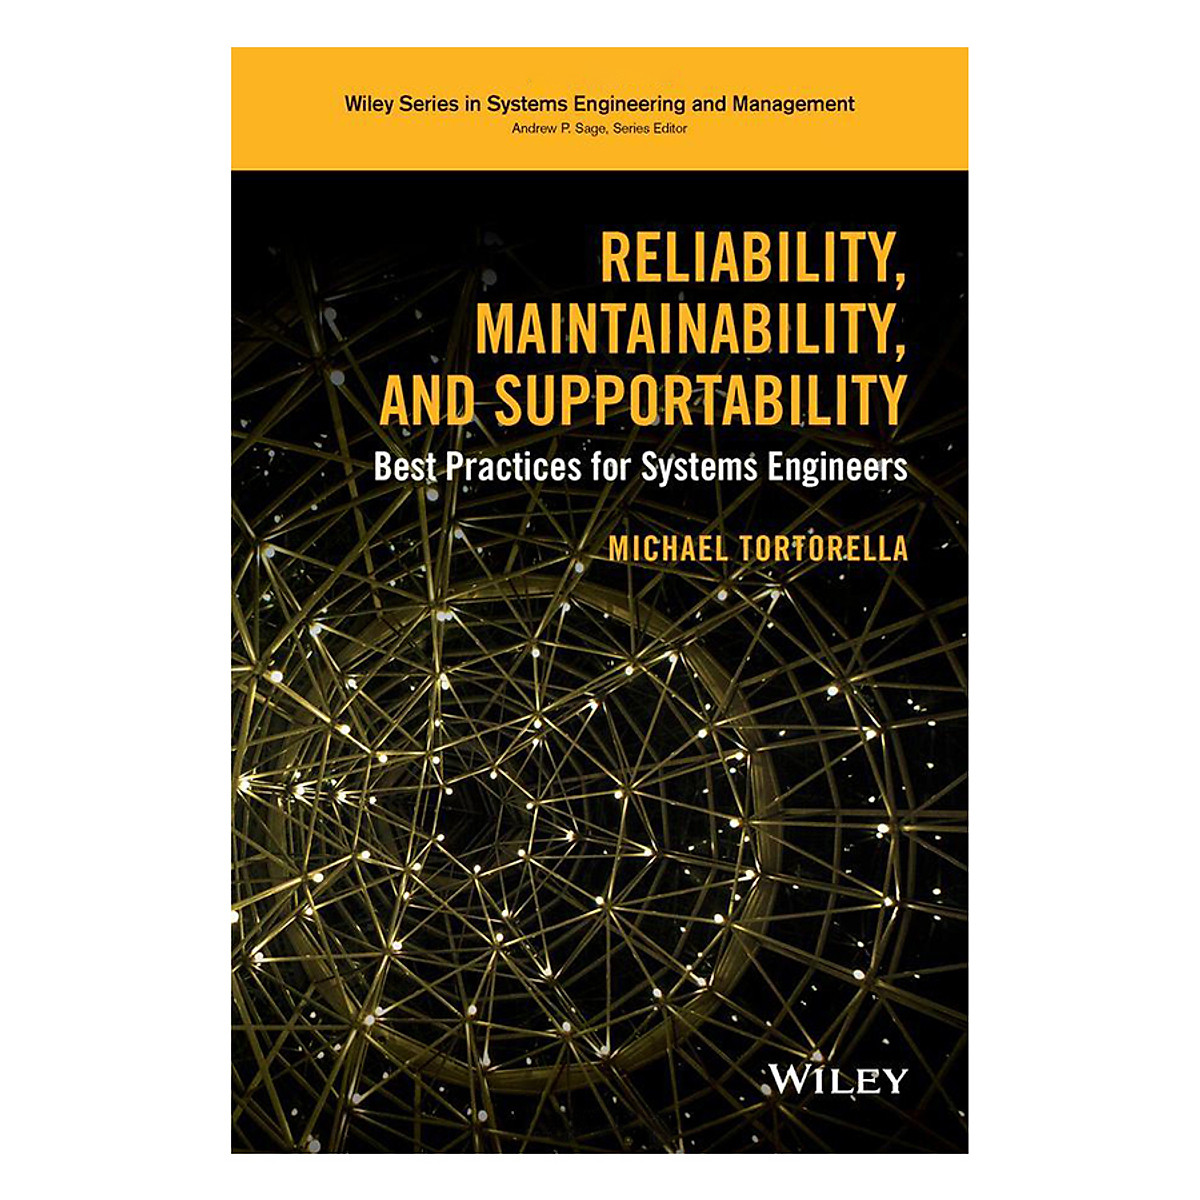 Reliability, Maintainability, And Supportability: Best Practices For Systems Engineers